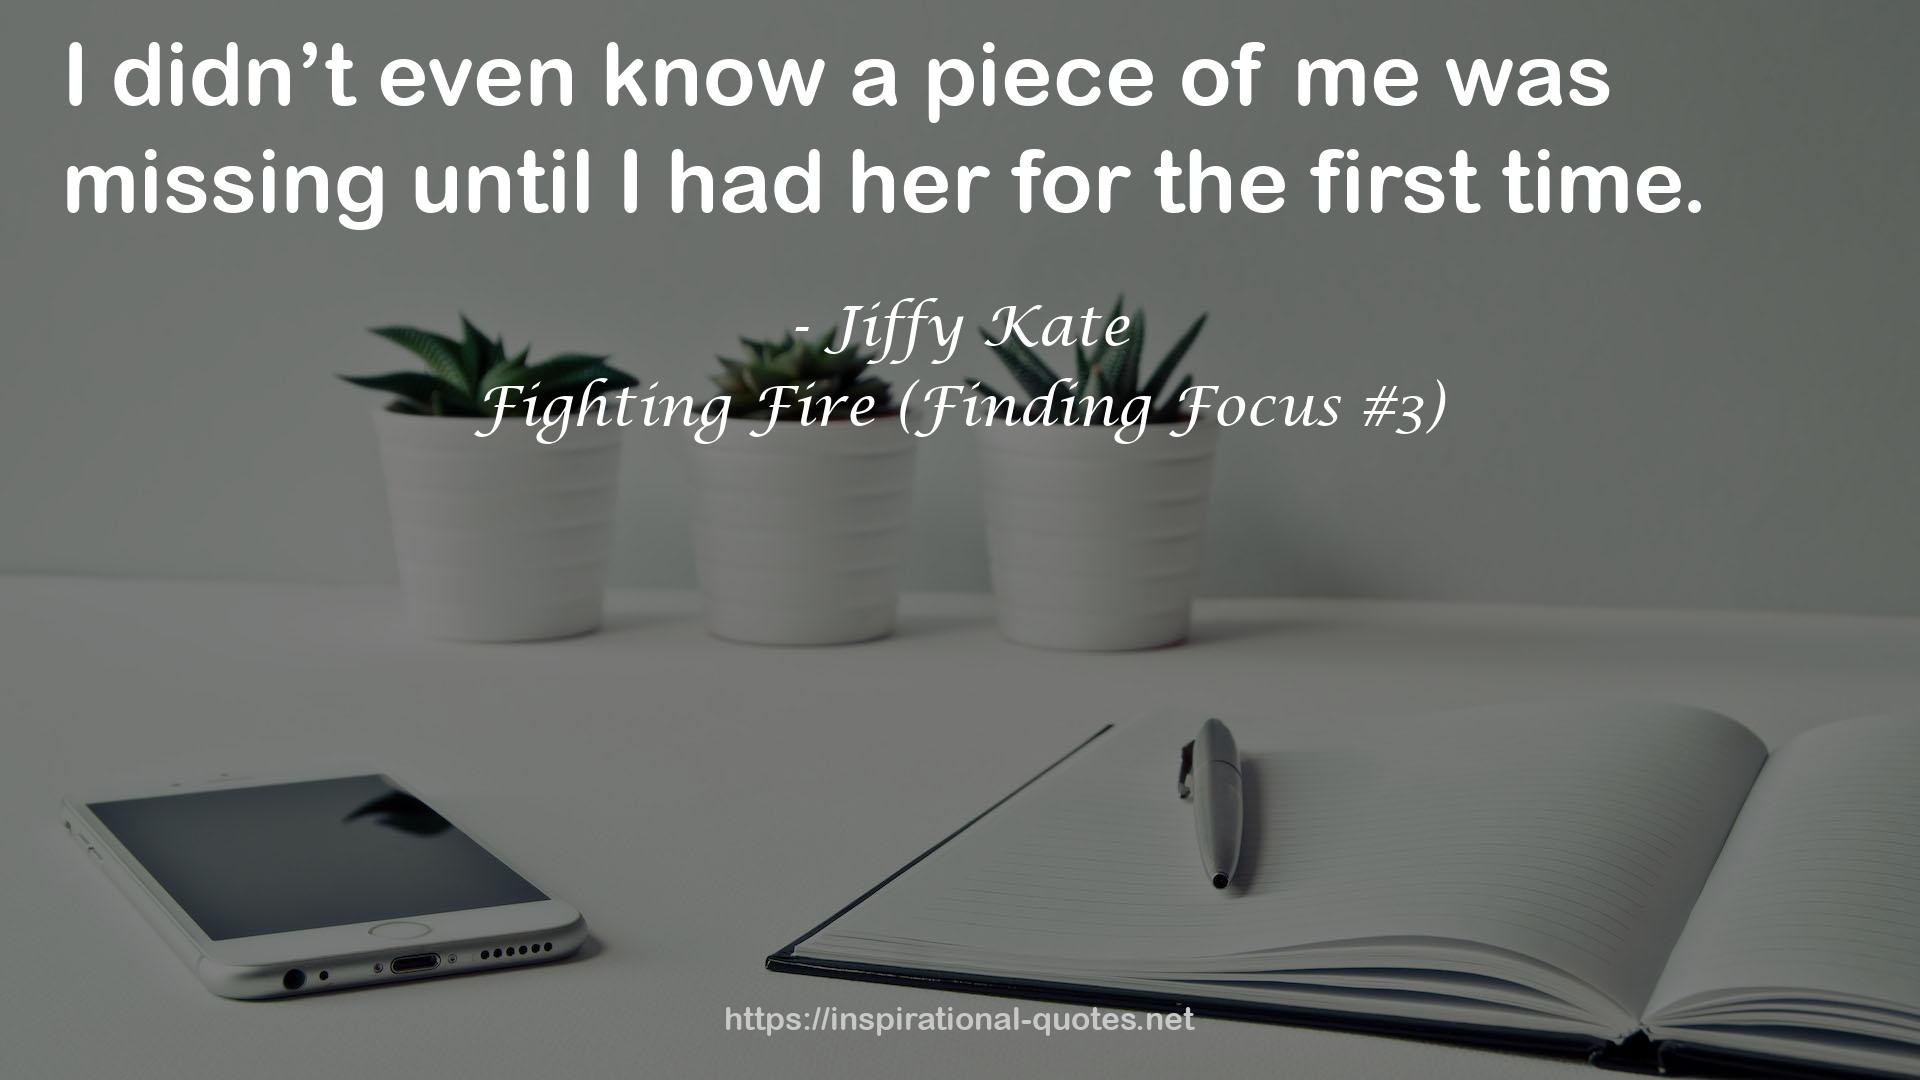 Fighting Fire (Finding Focus #3) QUOTES